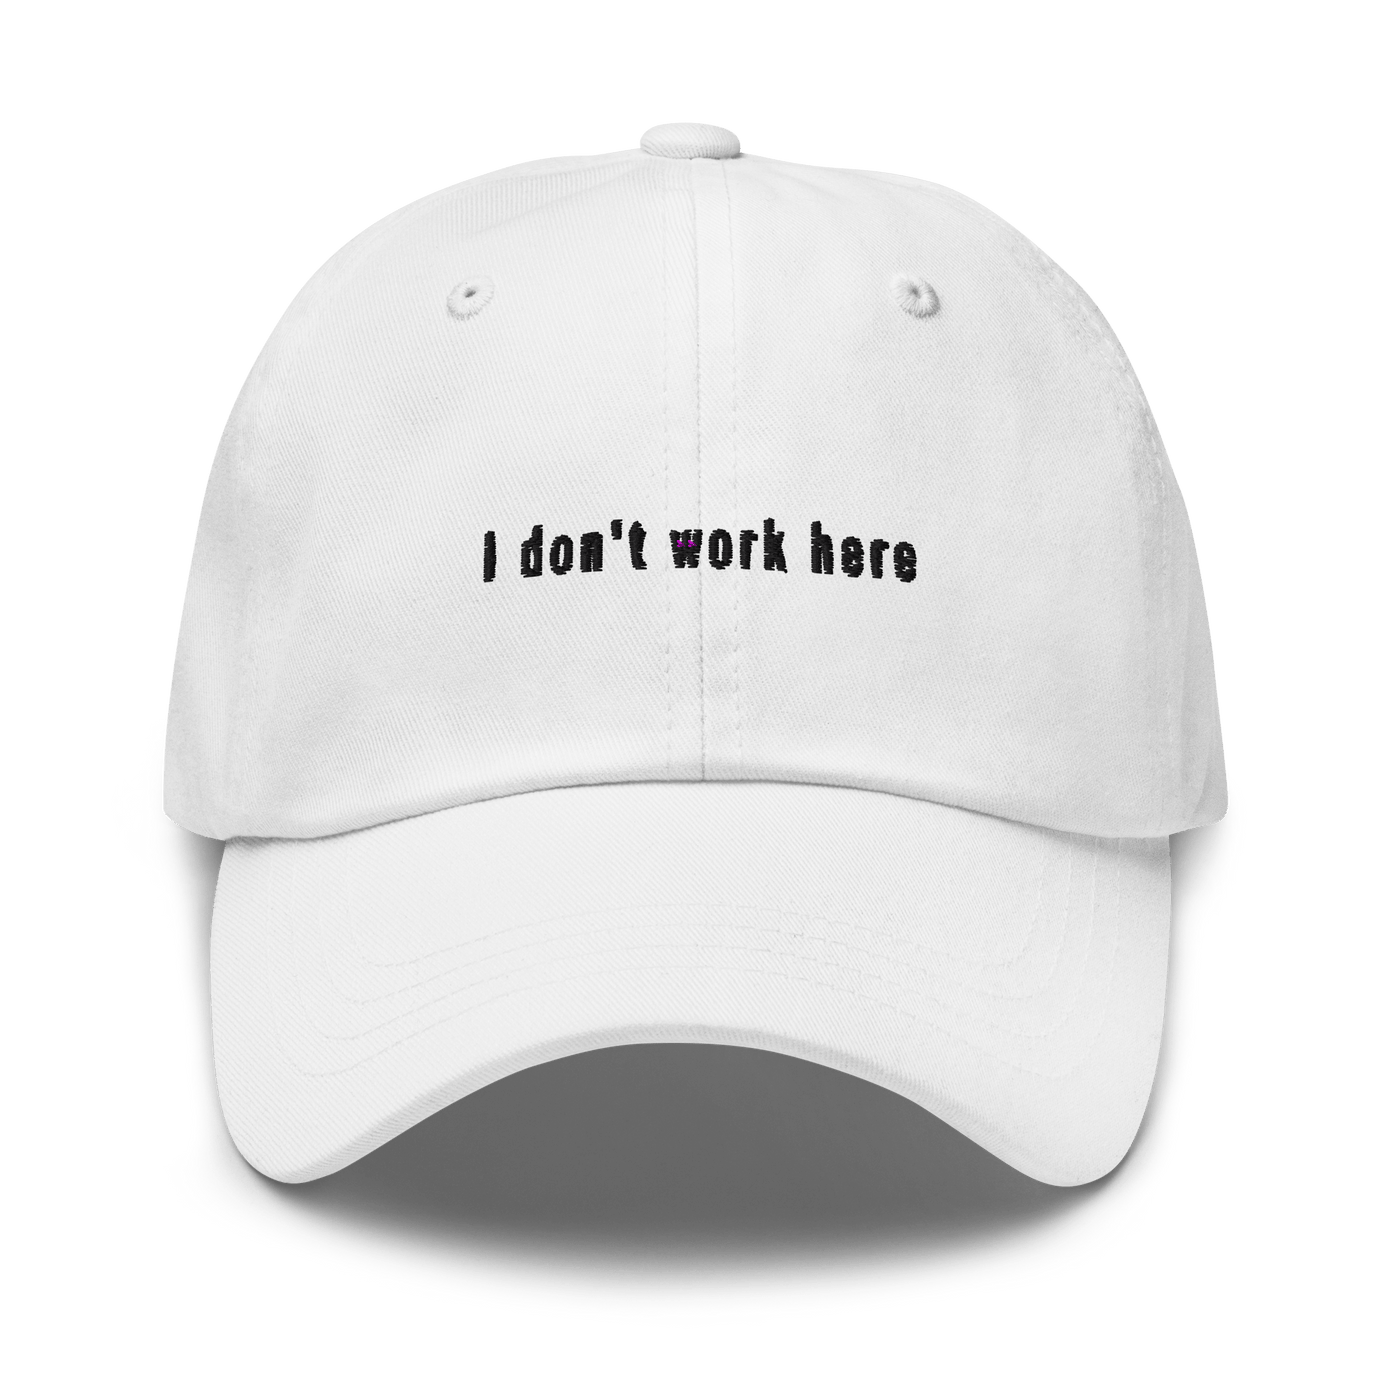 I don't work here Dad hat - White - - Just Another Cap Store